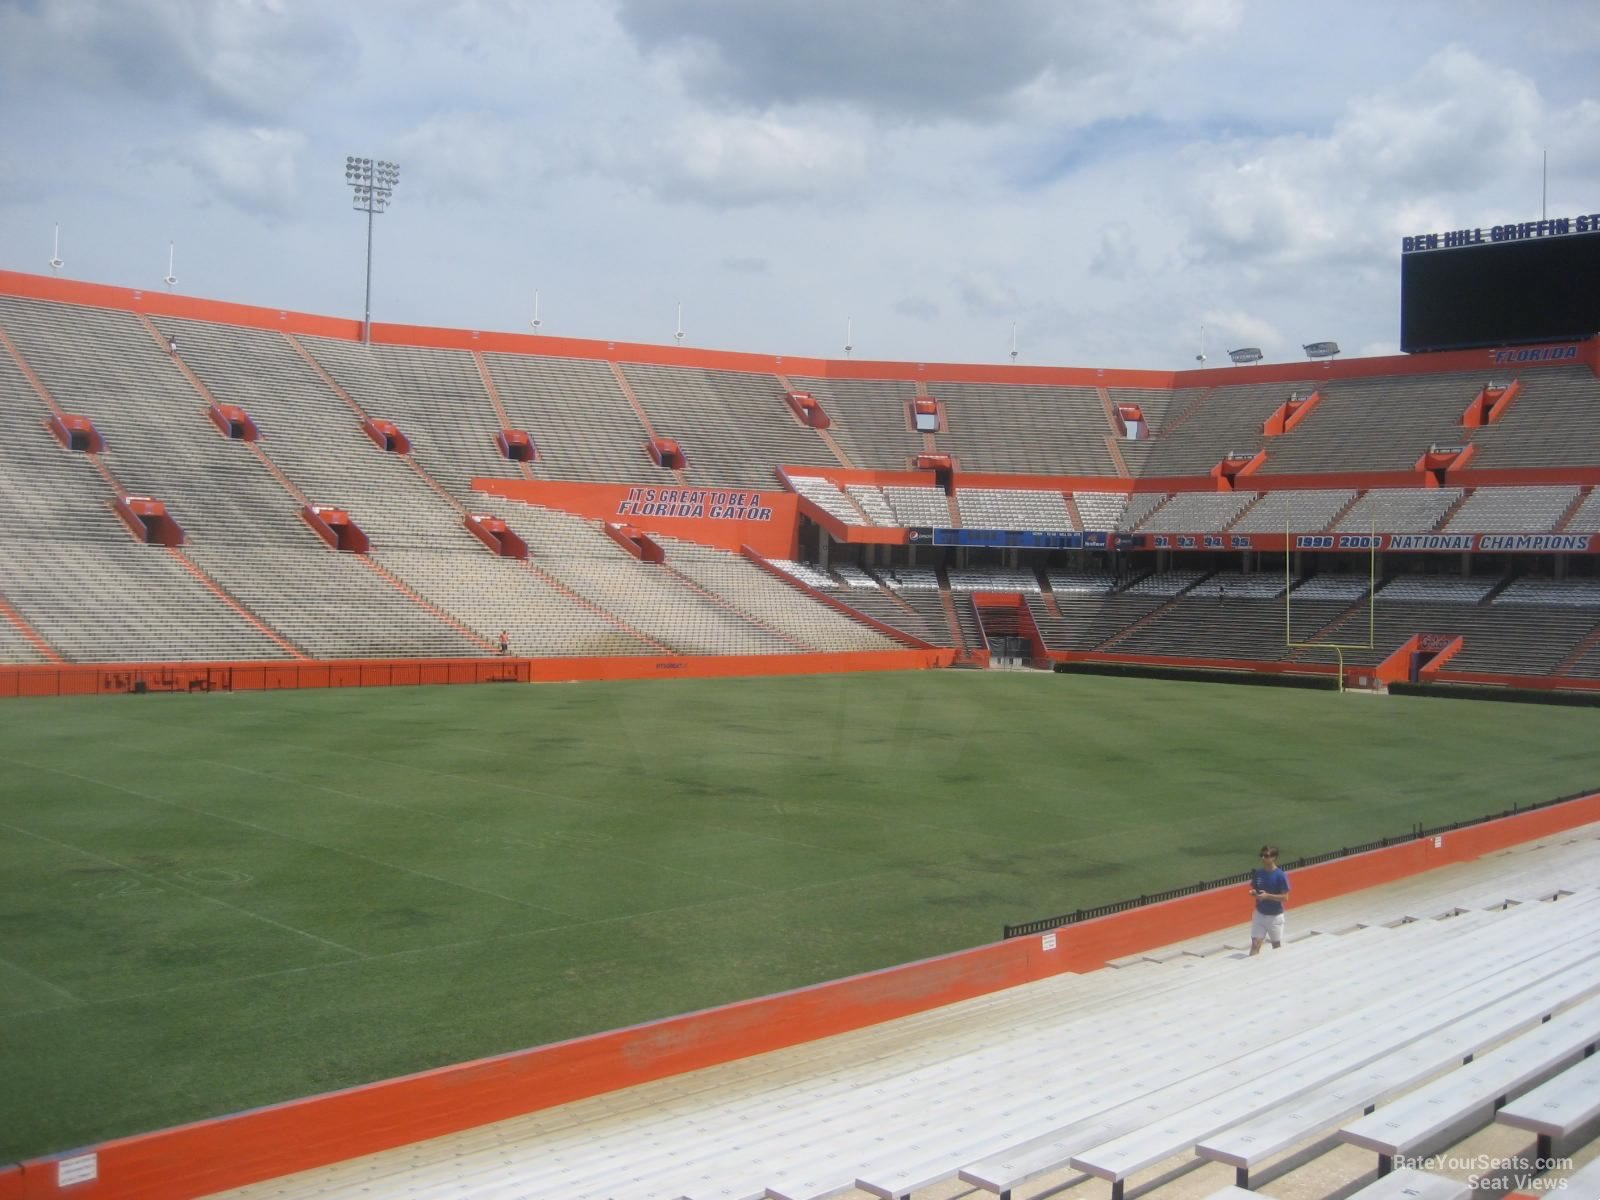 section 16, row 32 seat view  - ben hill griffin stadium